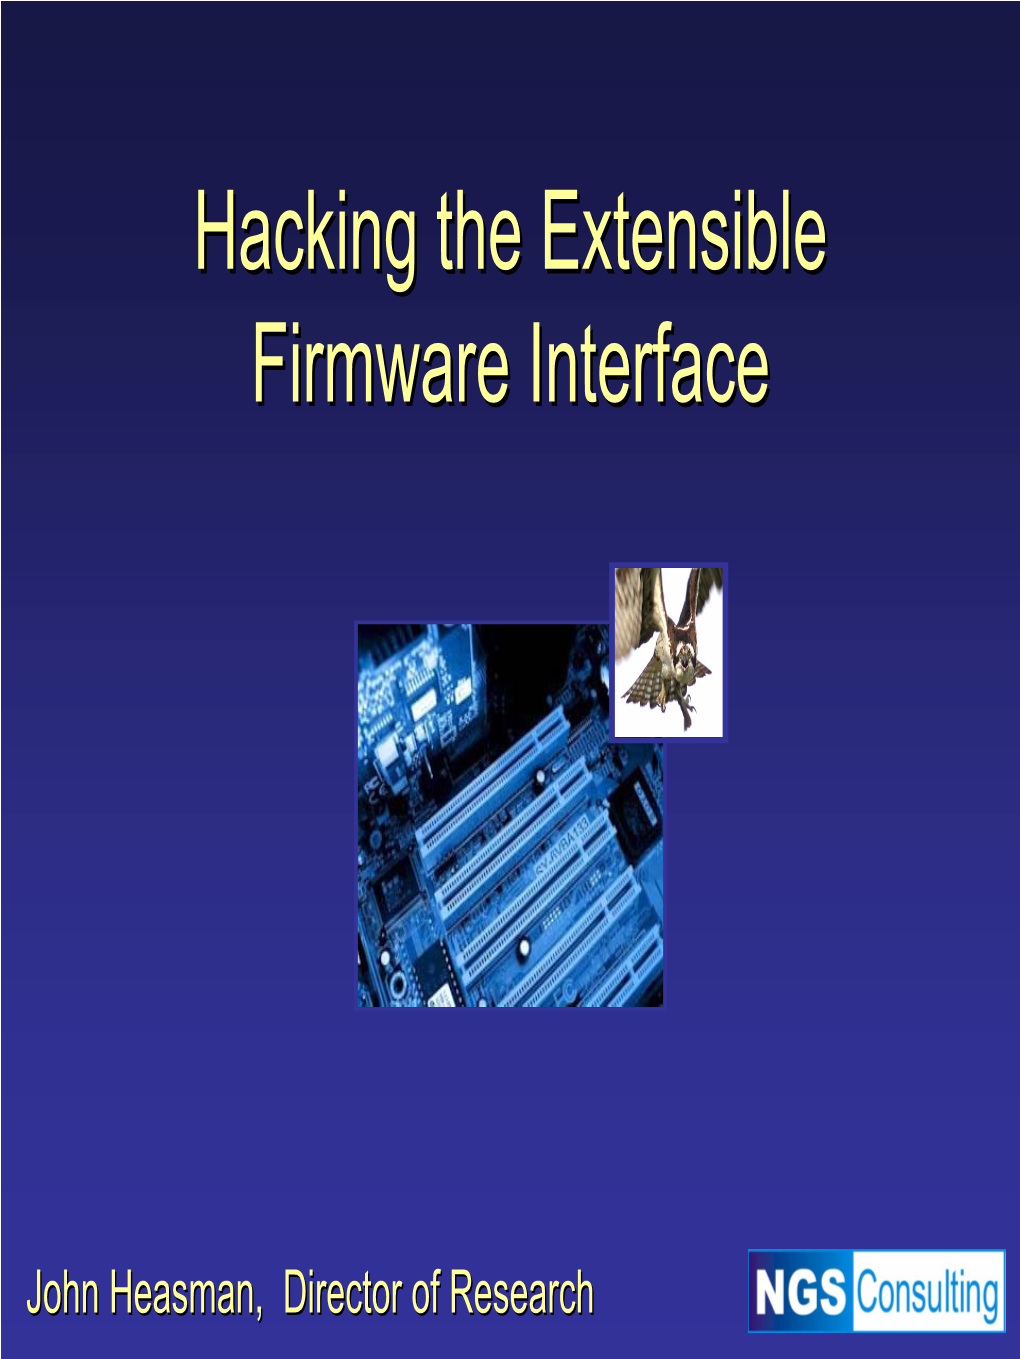 Hacking the Extensible Firmware Interface